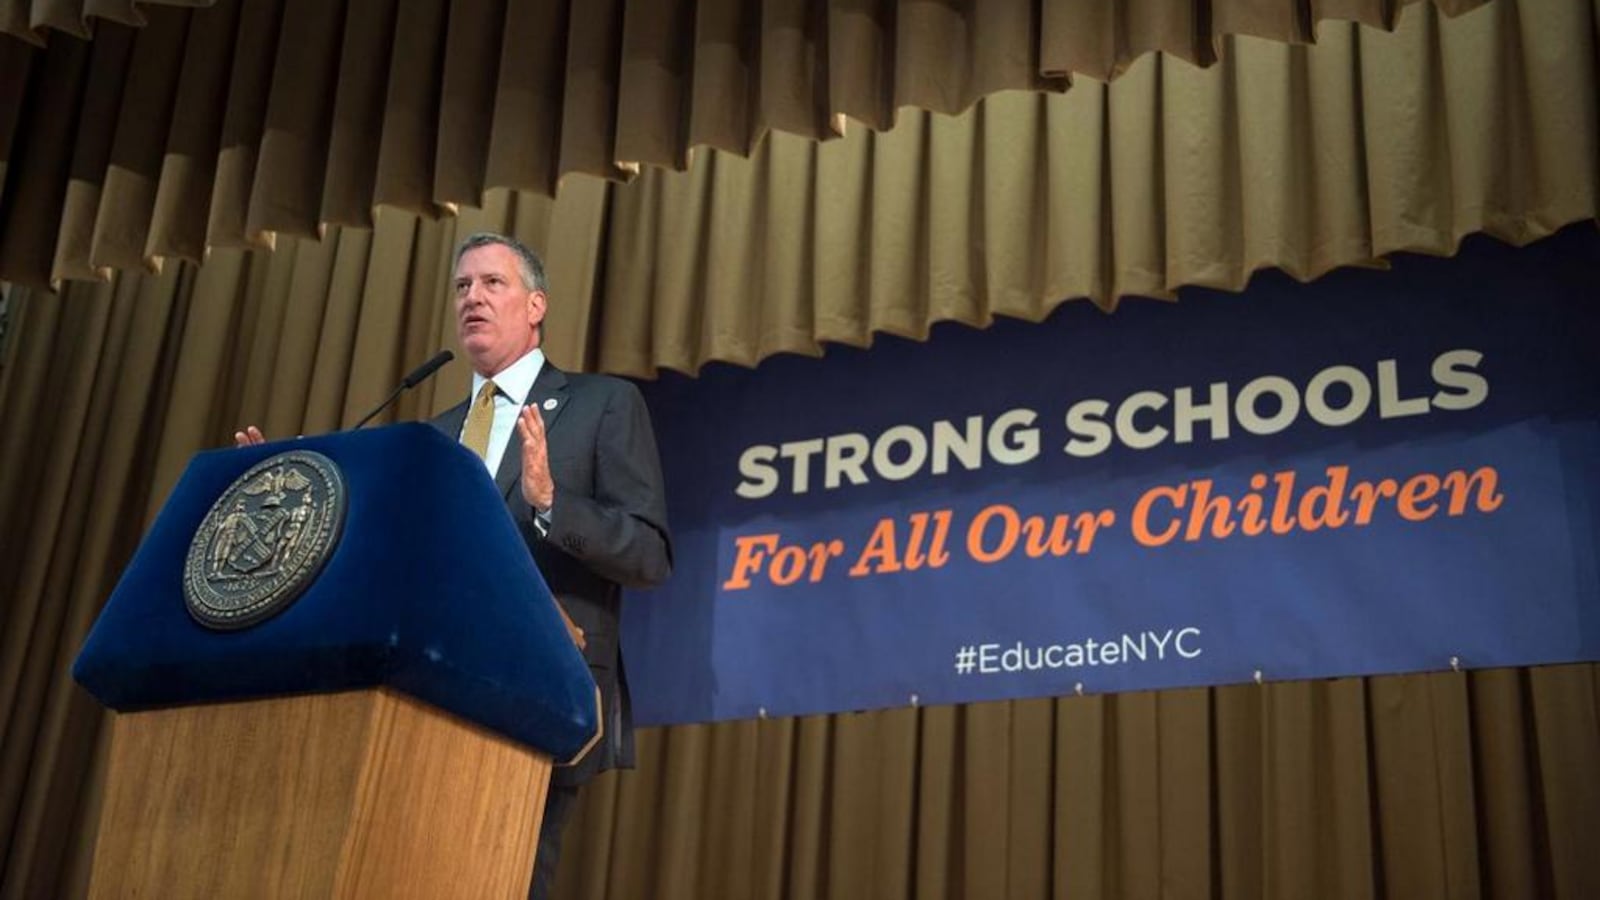 When Mayor Bill de Blasio unveiled the Renewal program in November 2014, he said the city would "move heaven and earth" to help the struggling schools improve. (Photo: Twitter/NYC Mayor's Office)